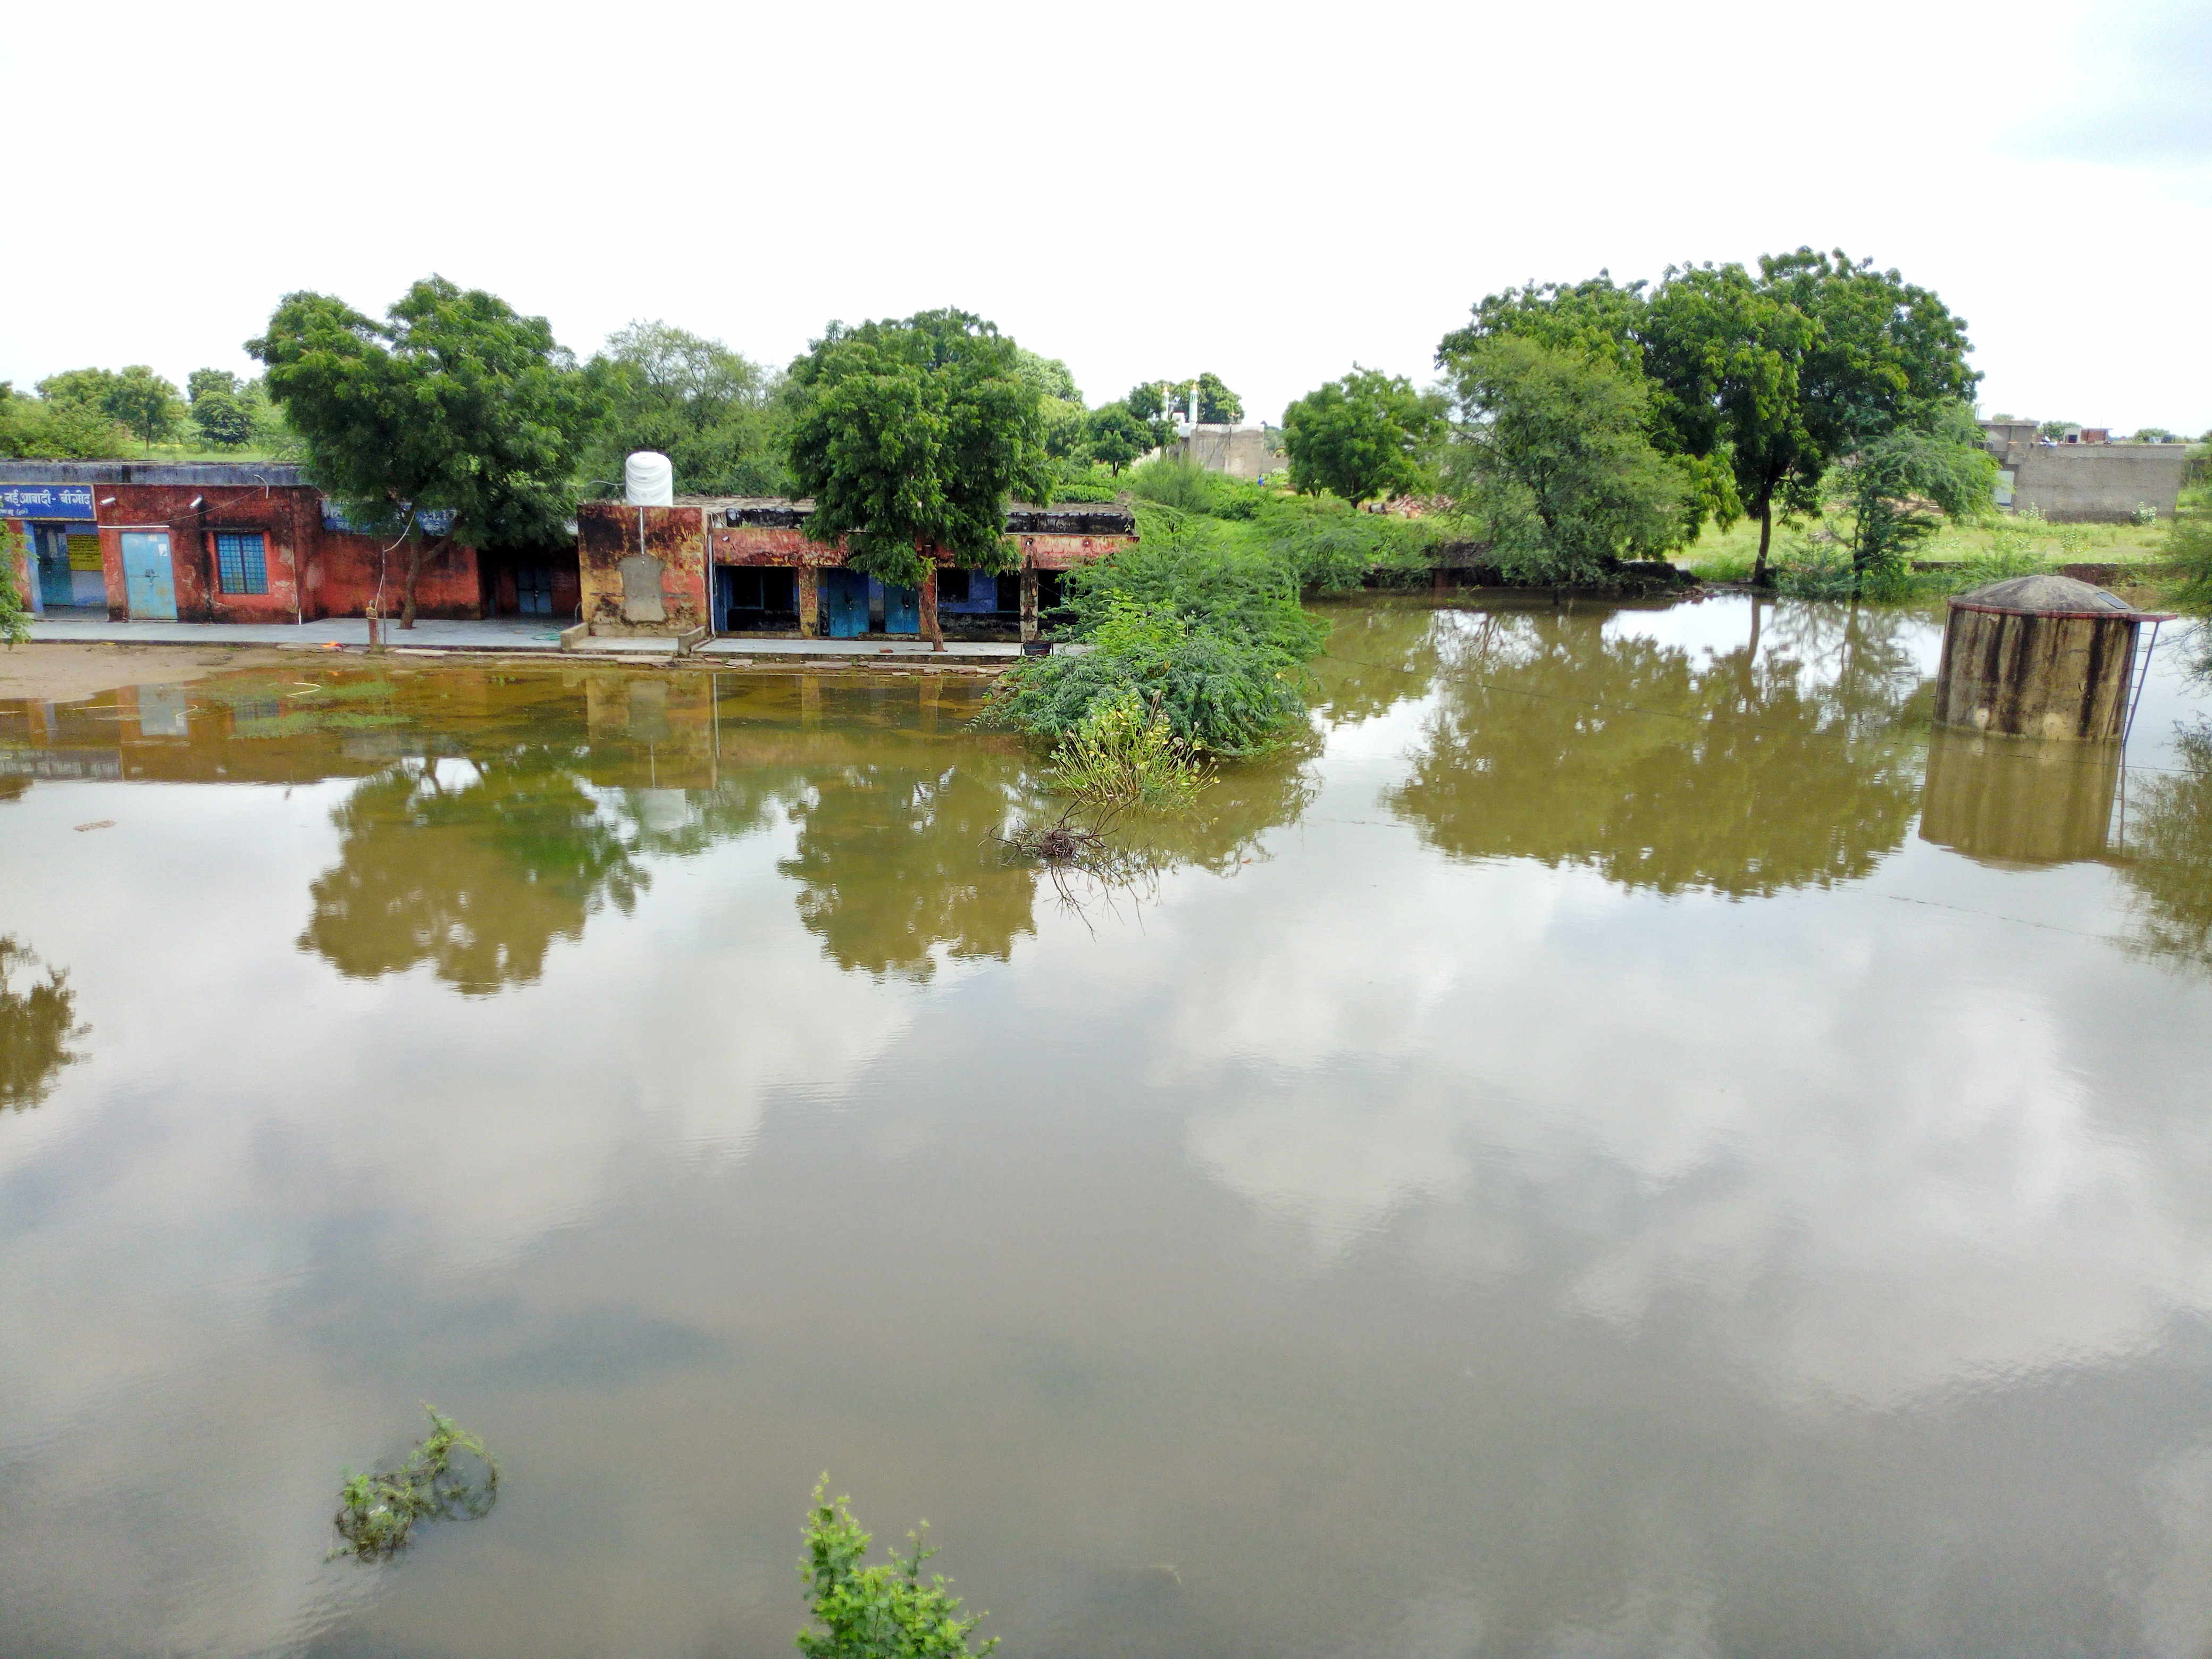  Four feet of water filled the school campus in Bhilwara